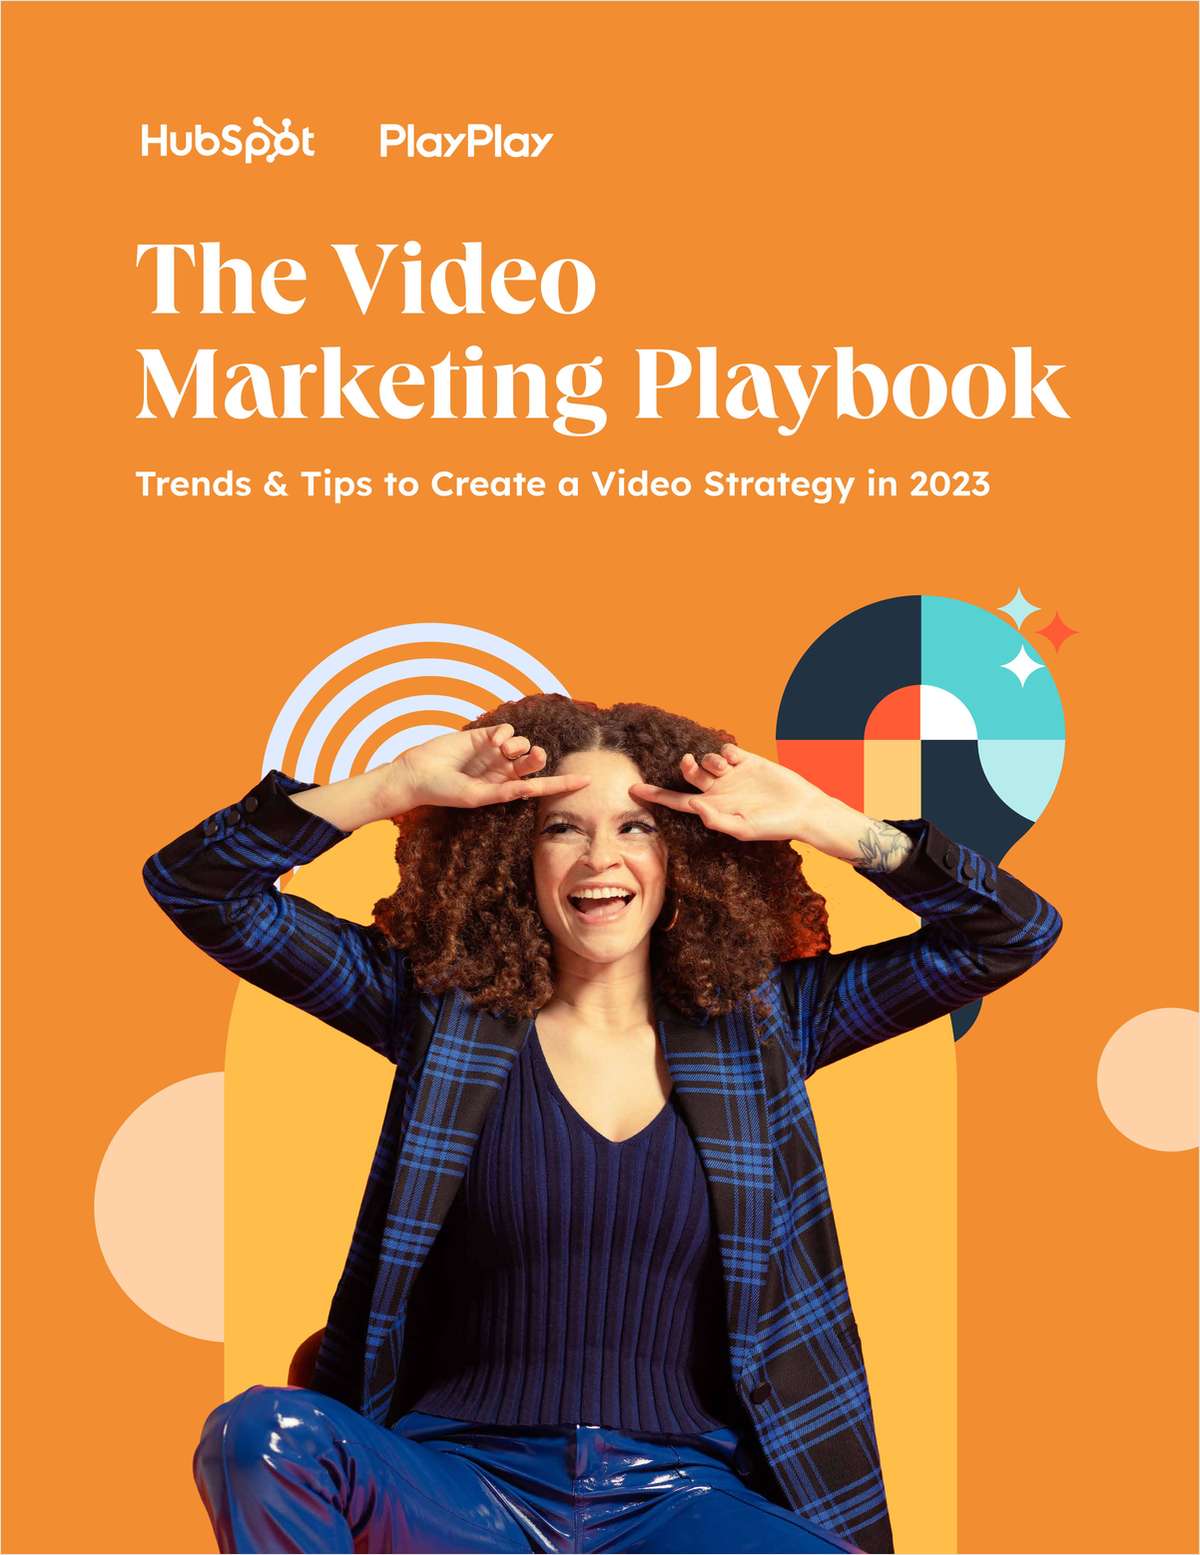 The Video Marketing Playbook: Trends & Tips to Create a Video Strategy in 2023